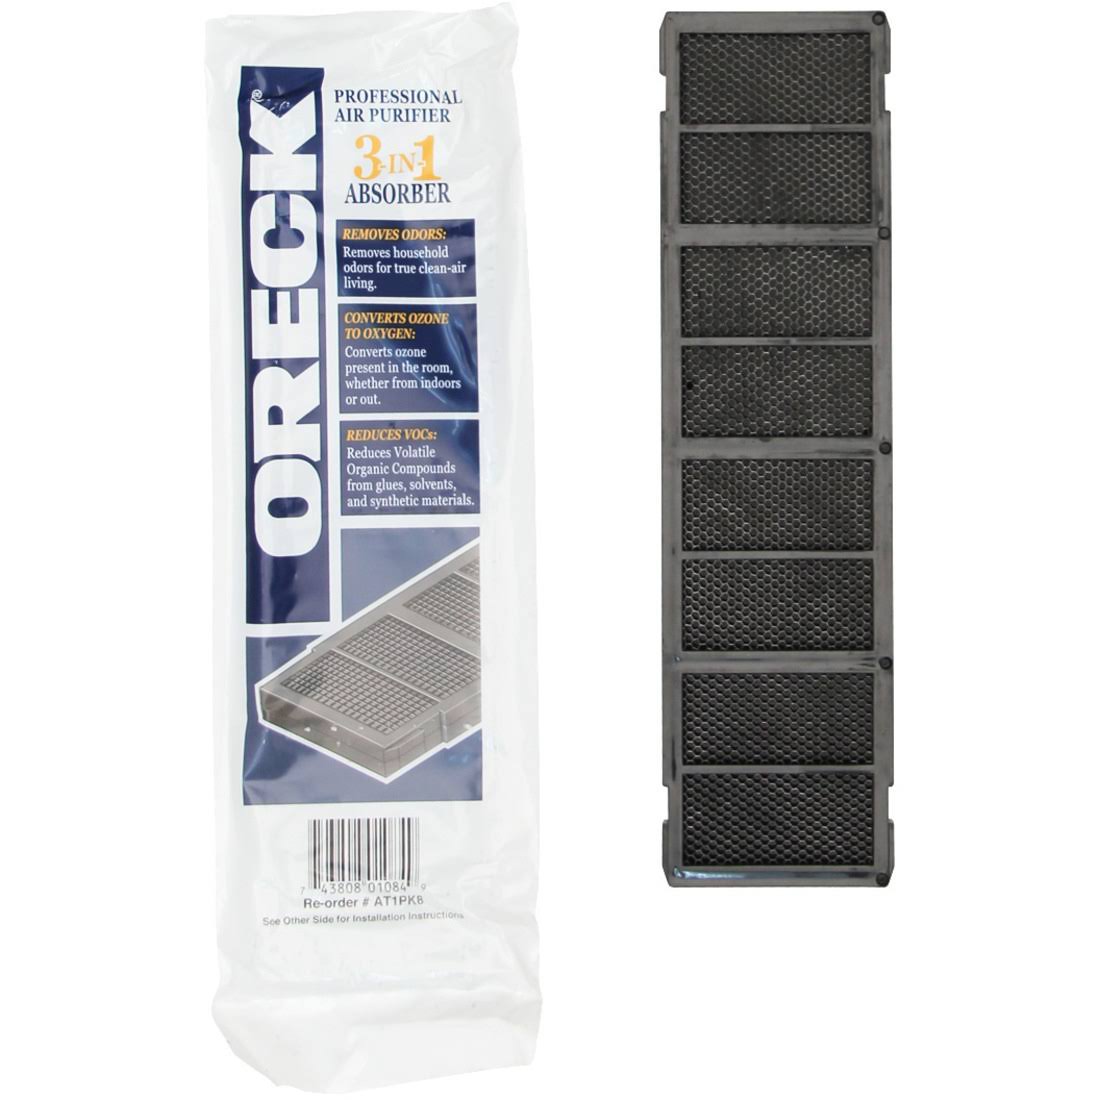 Oreck Air Purifier 3 In 1 Odor Absorber Filter